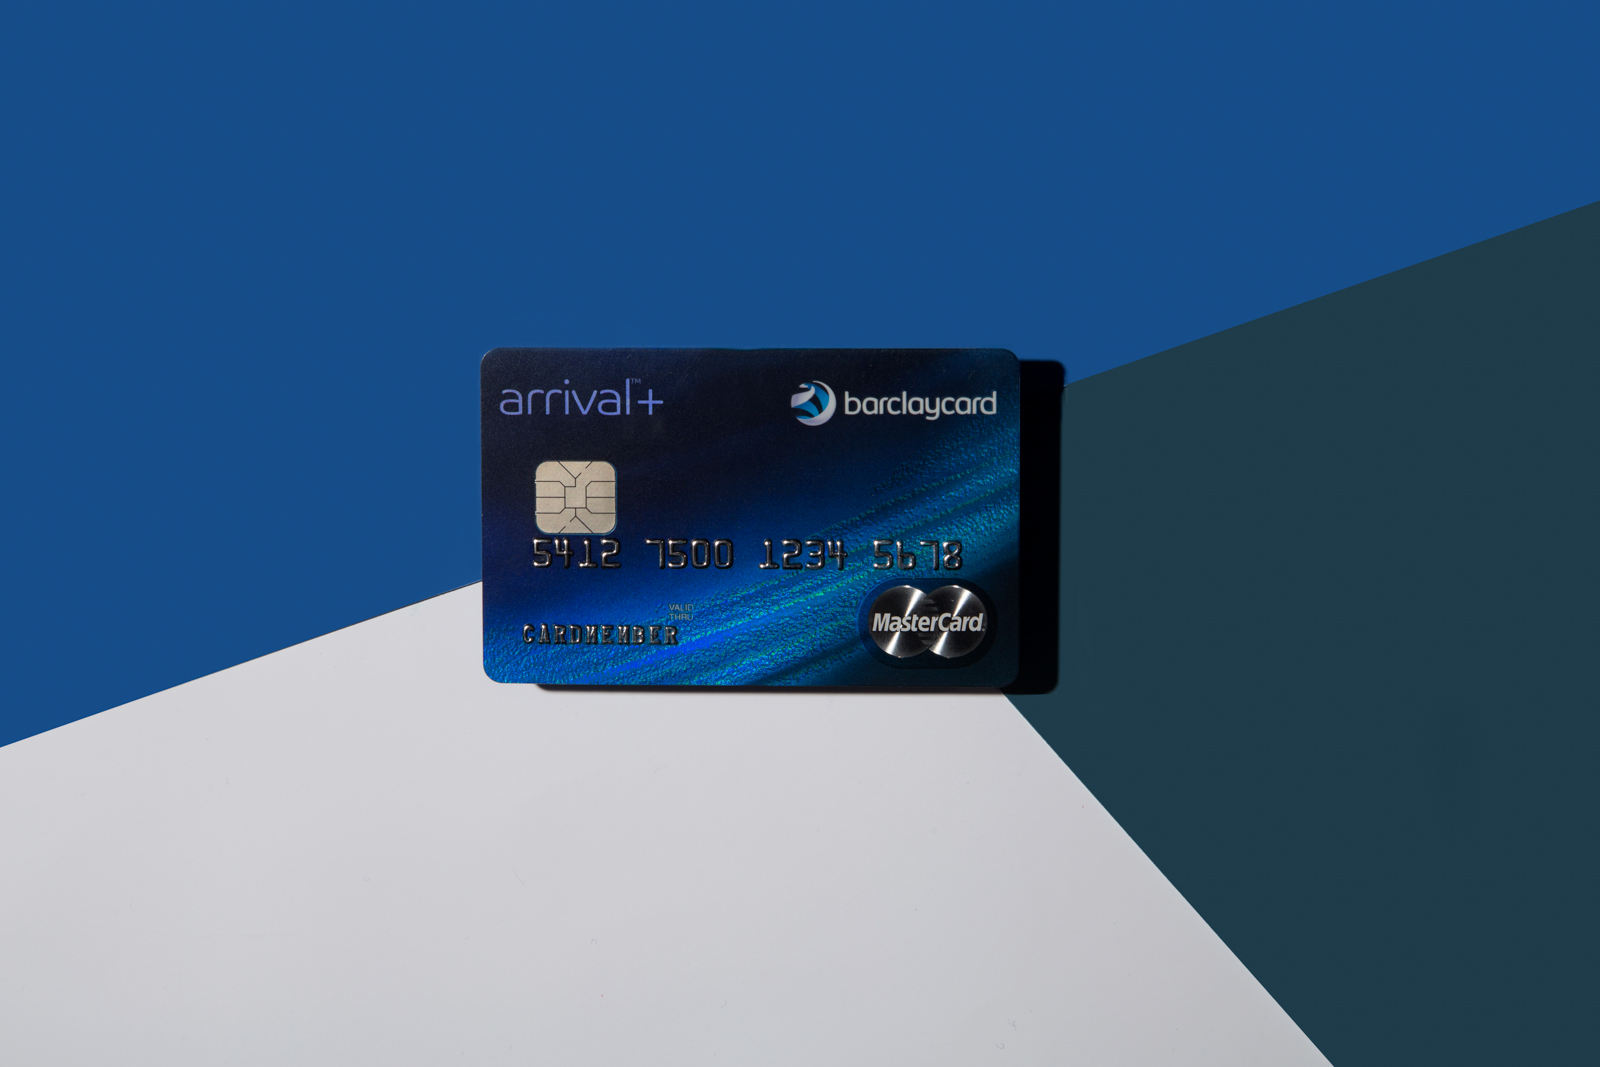 Barclaycards with the Best Rewards - Learn About Them Here